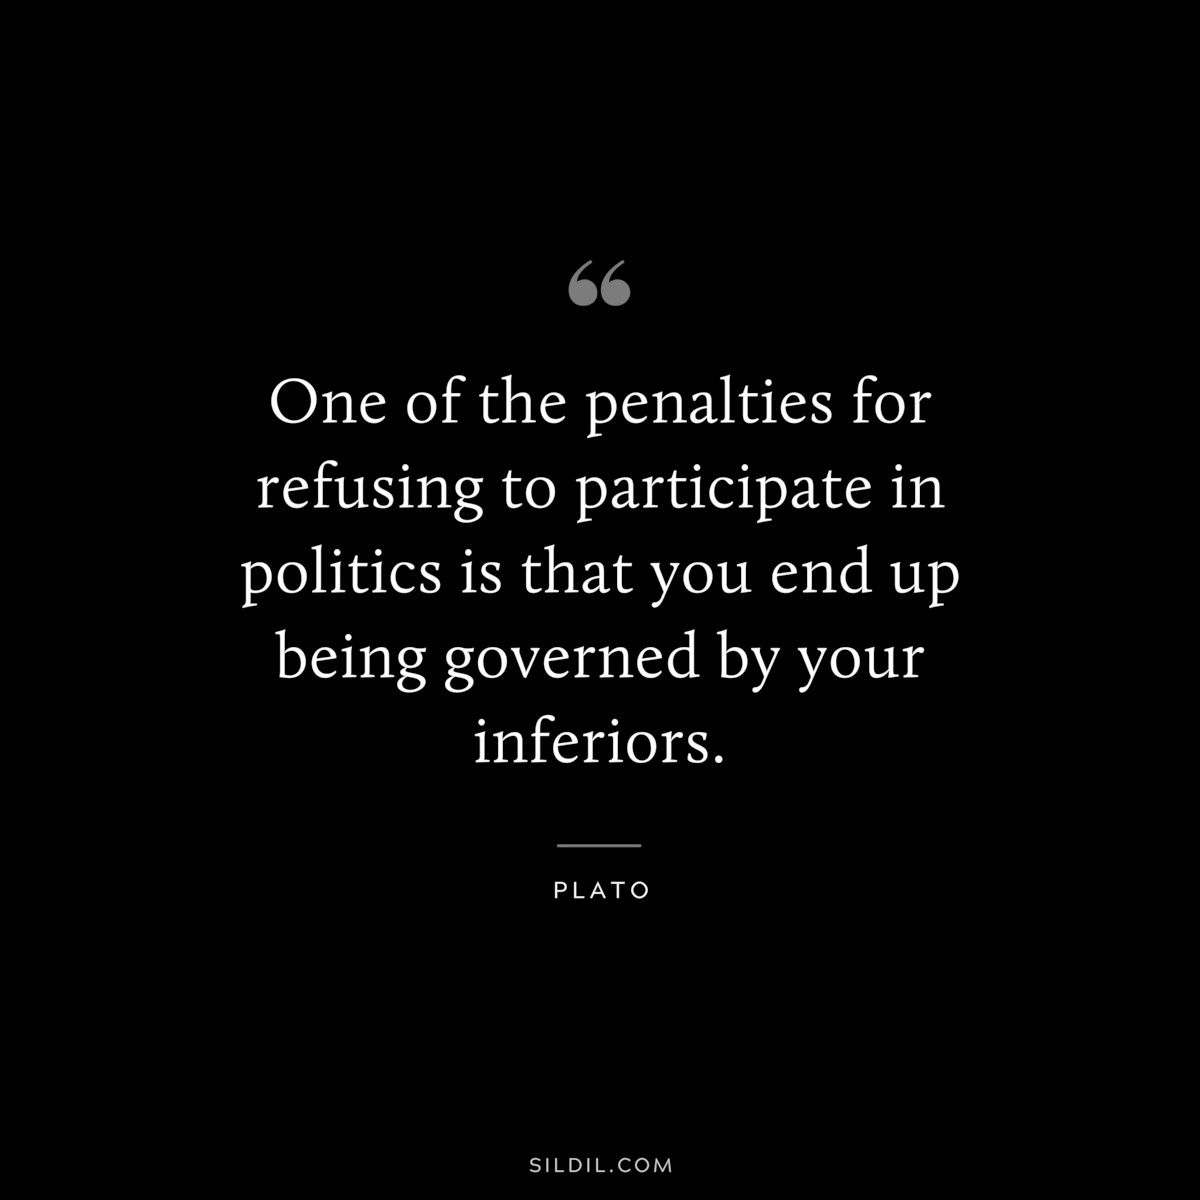 One of the penalties for refusing to participate in politics is that you end up being governed by your inferiors. ― Plato